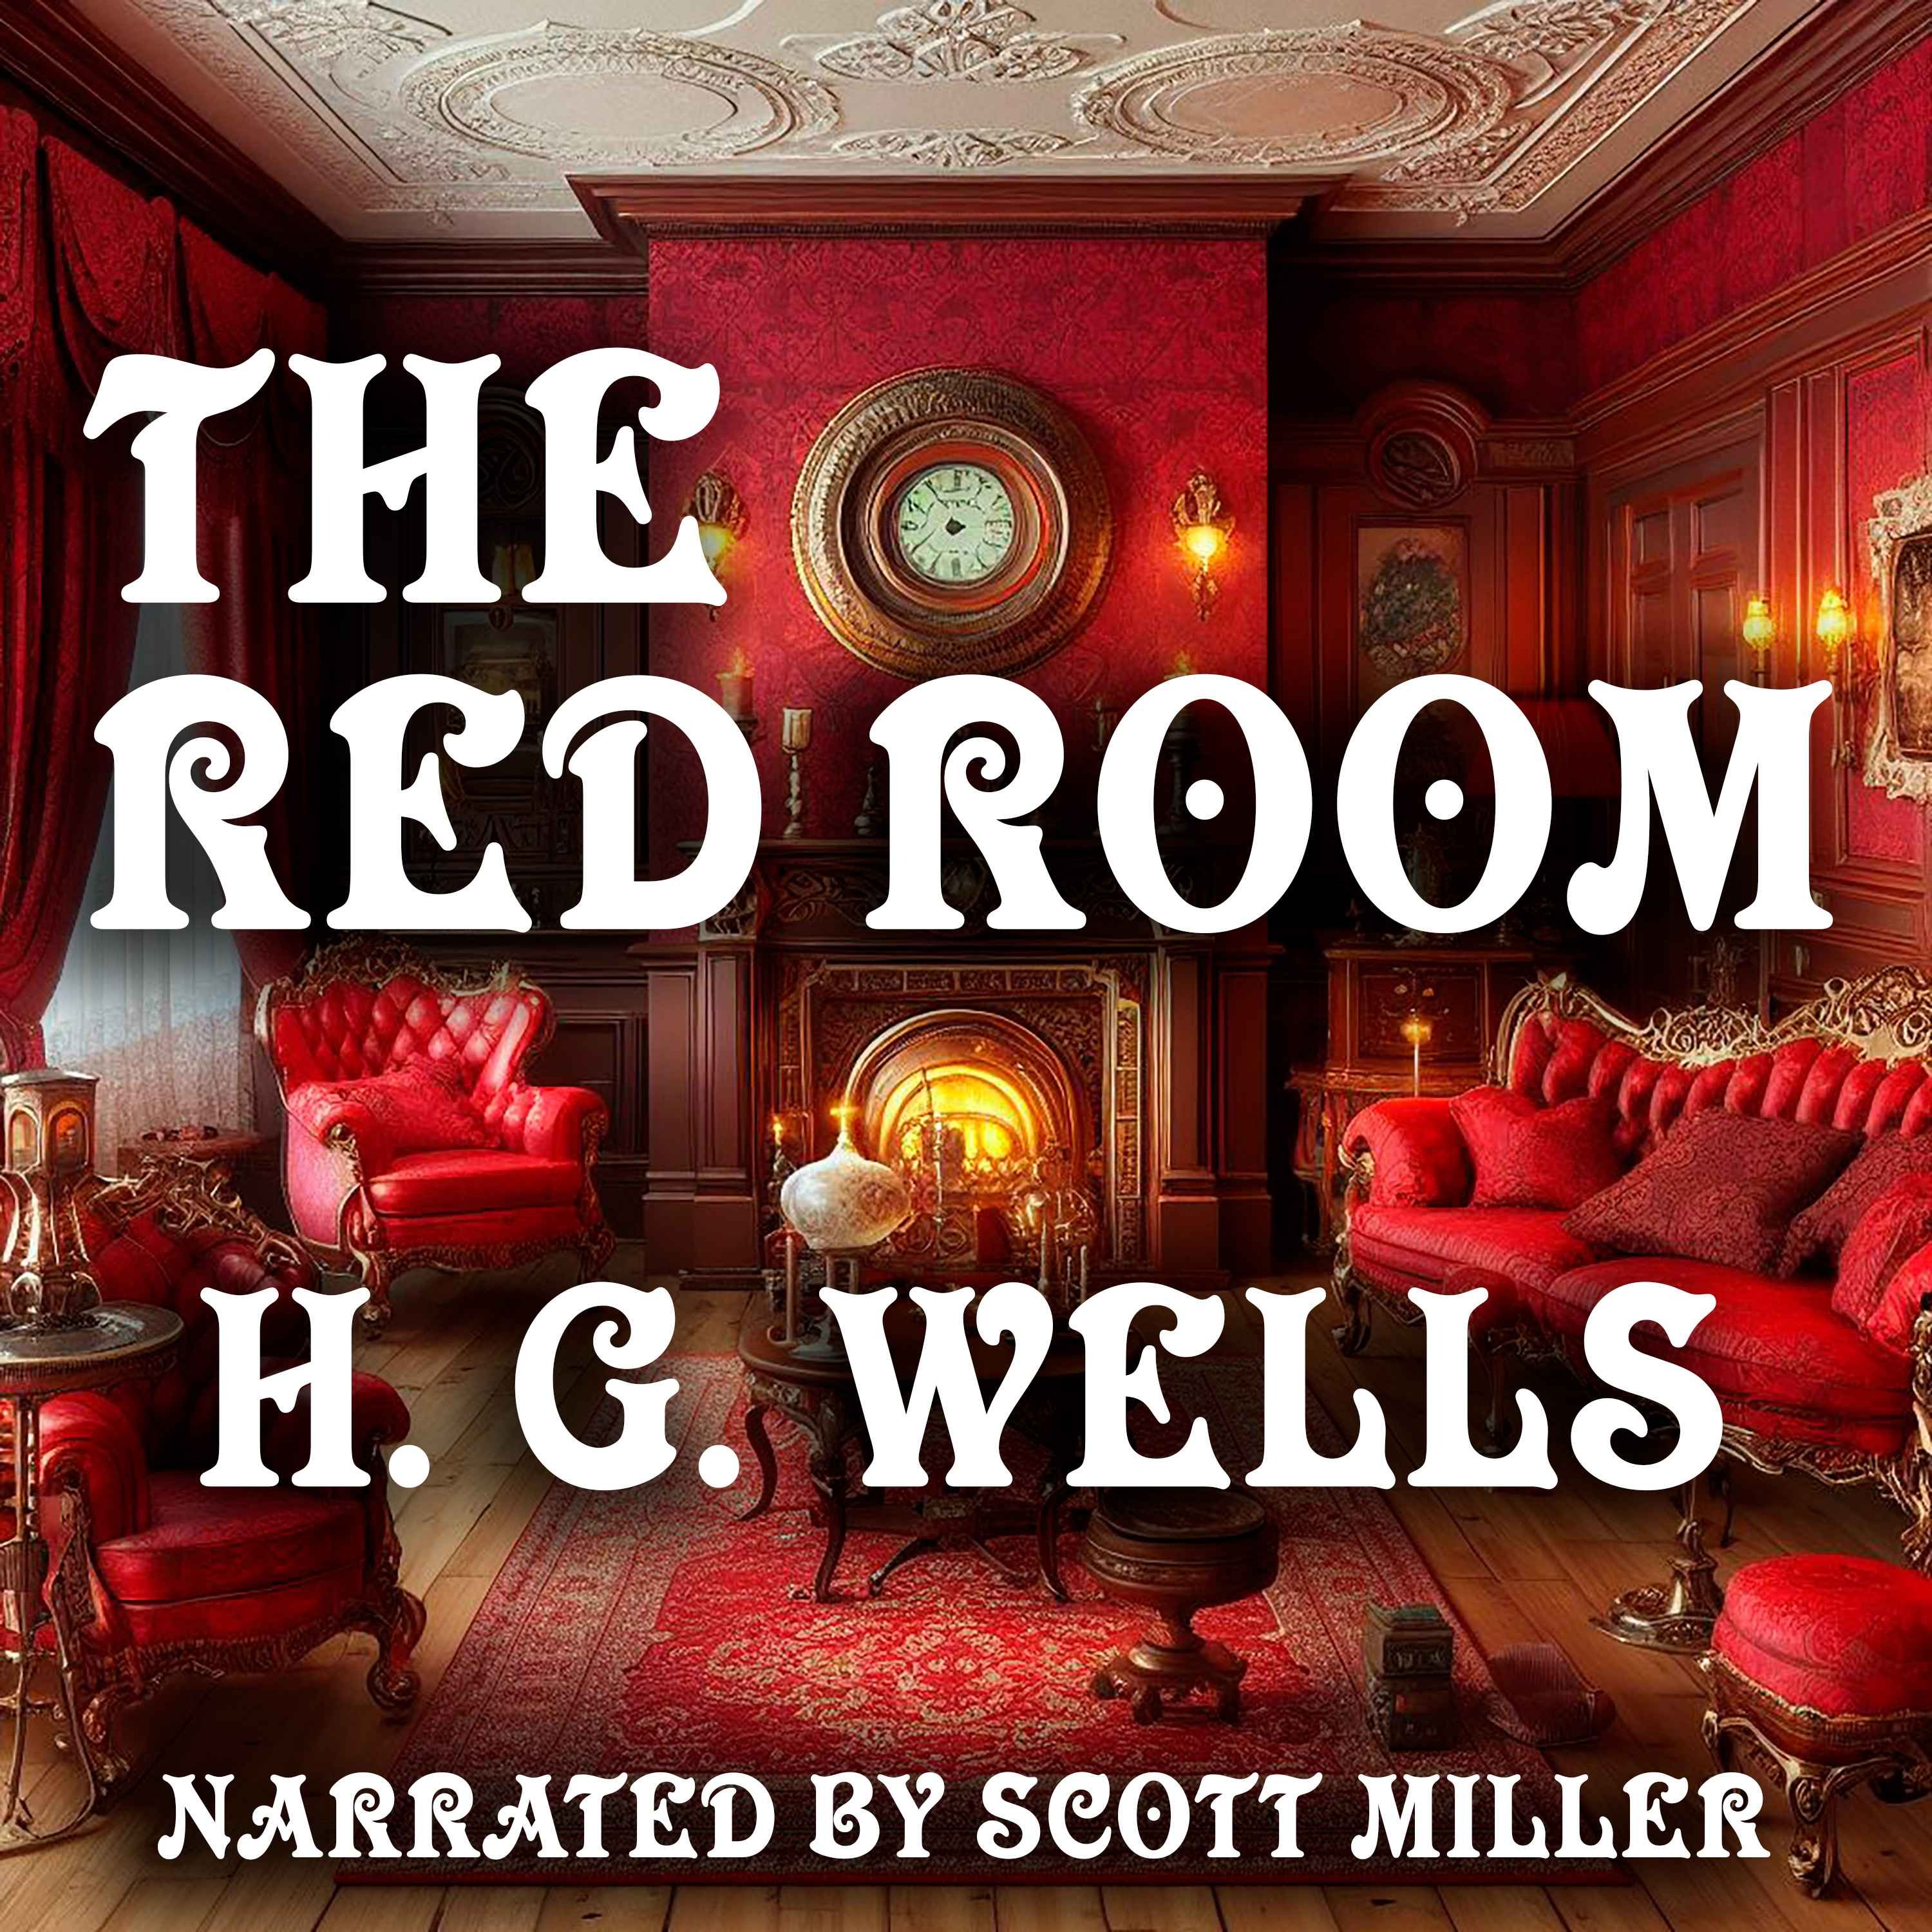 The Red Room by H. G. Wells - Gothic Horror Short Story